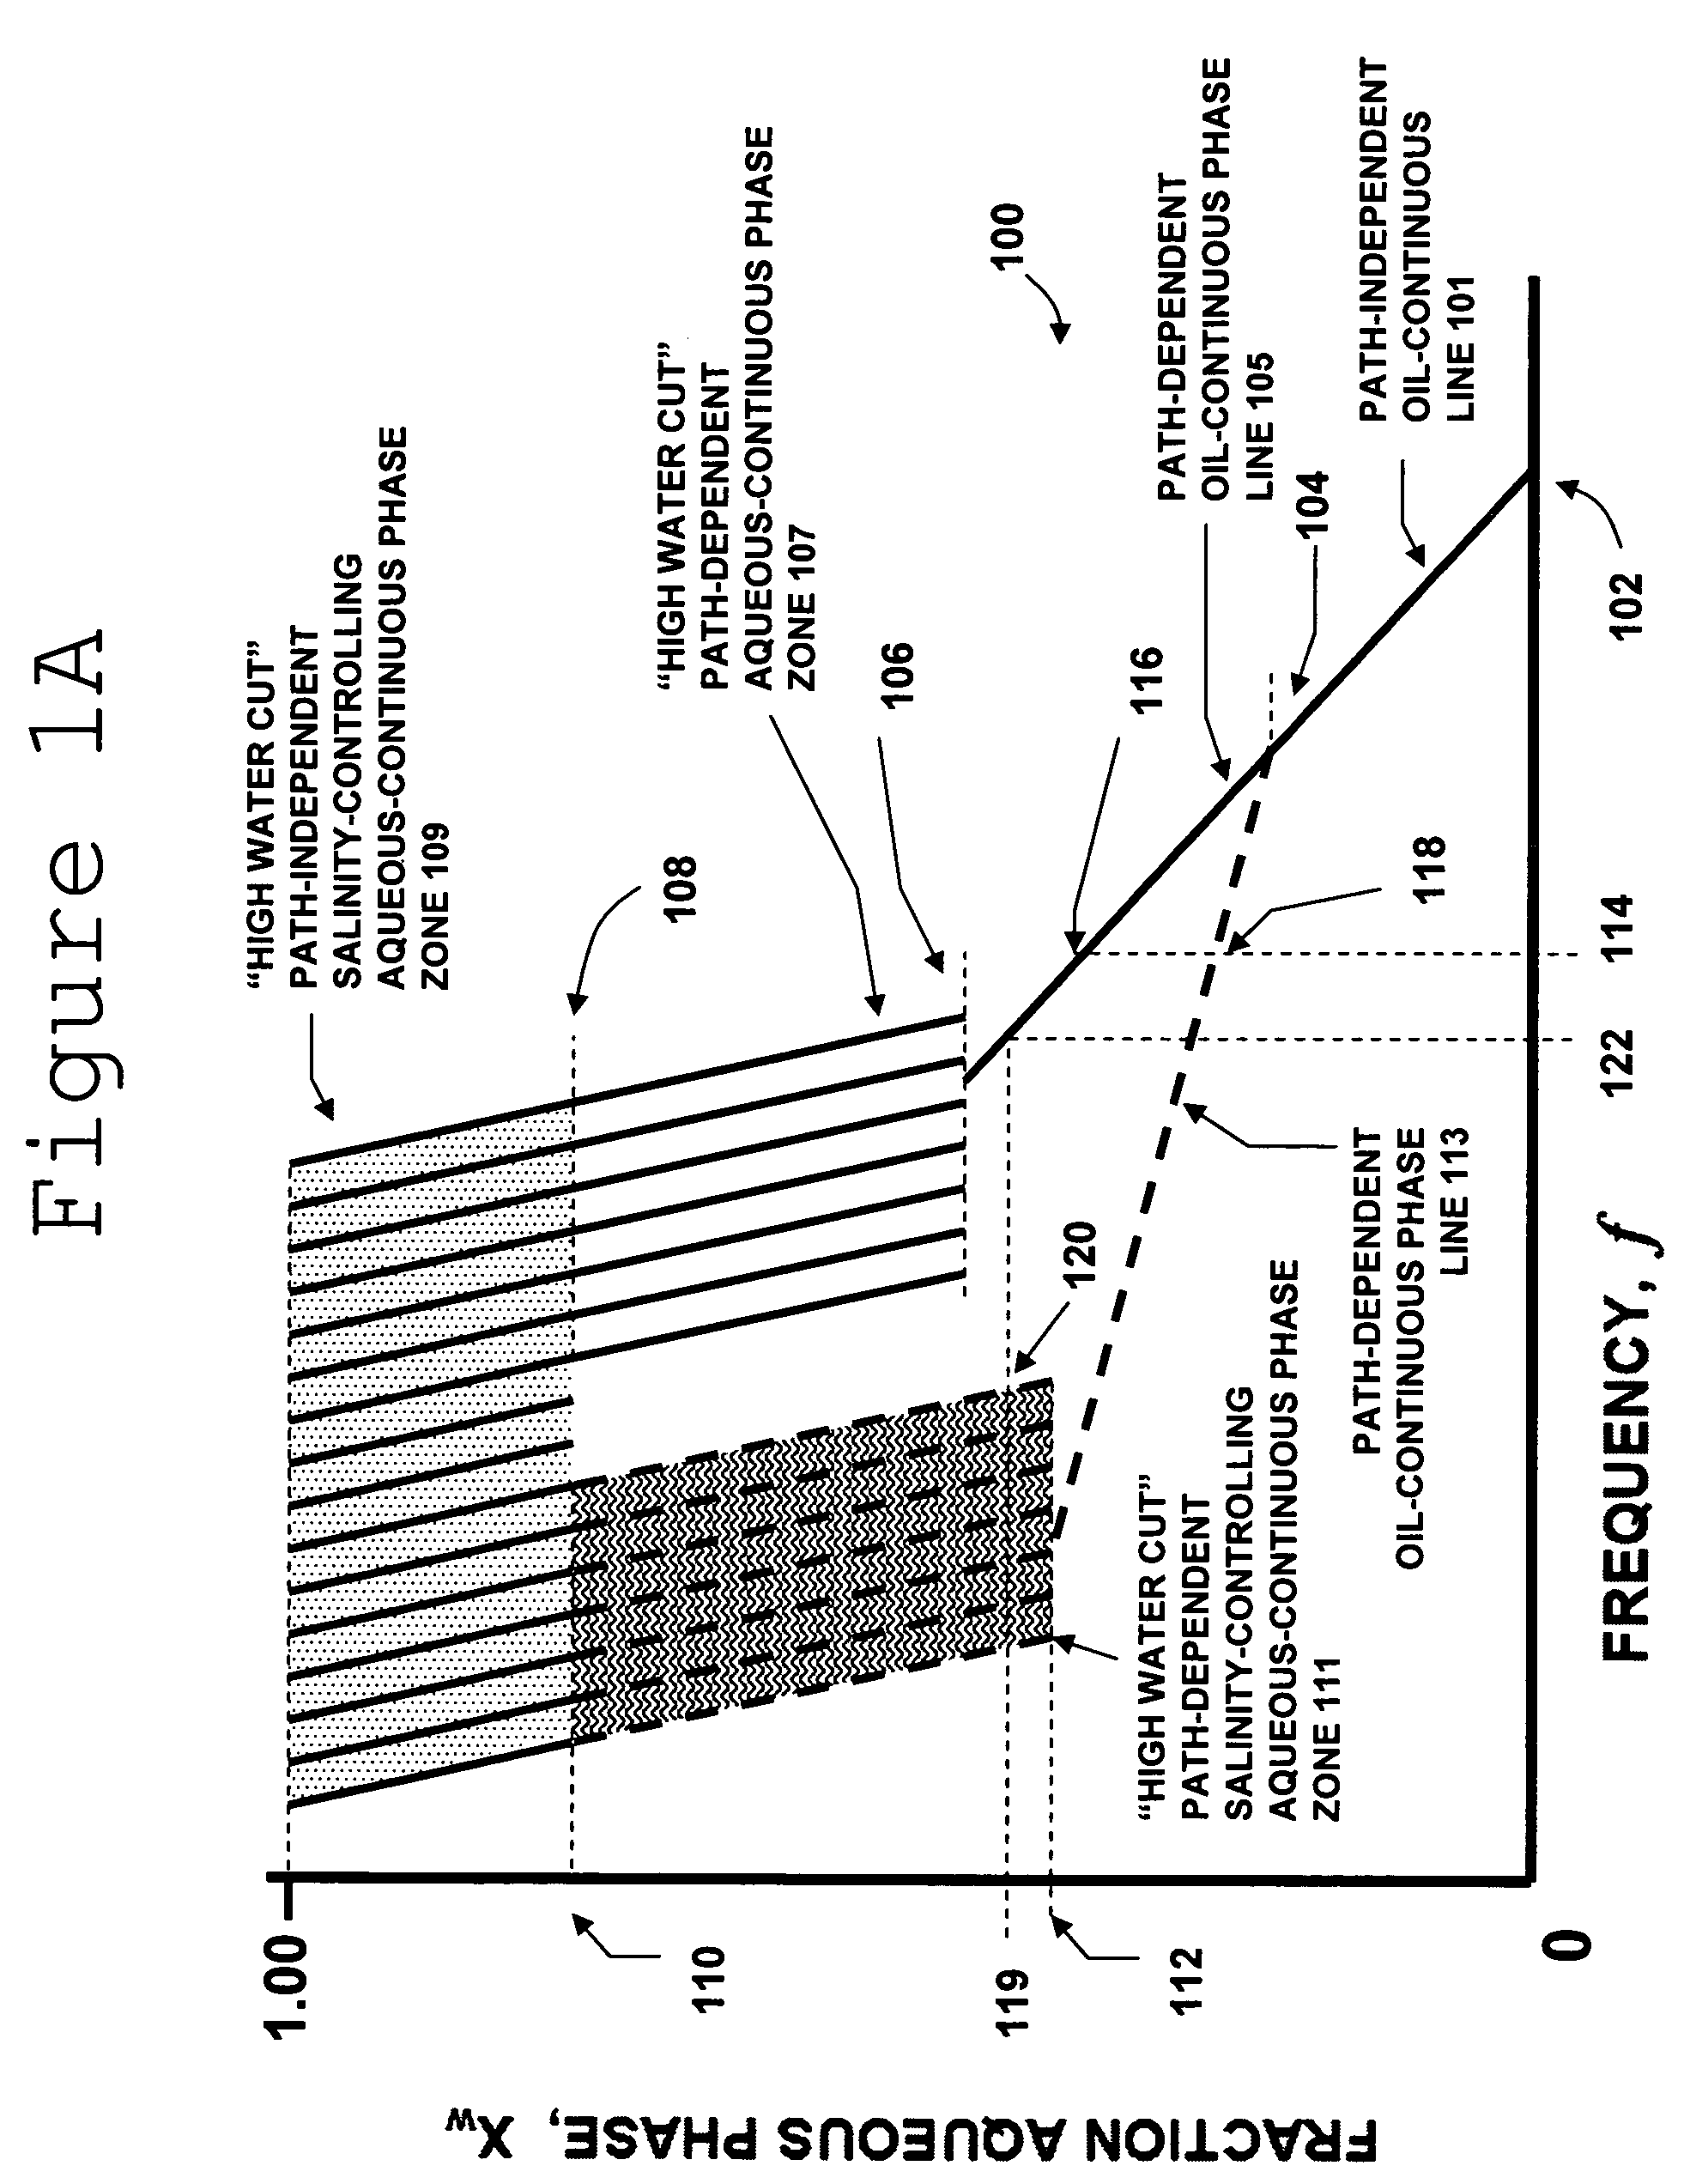 Multiphase fluid characterization